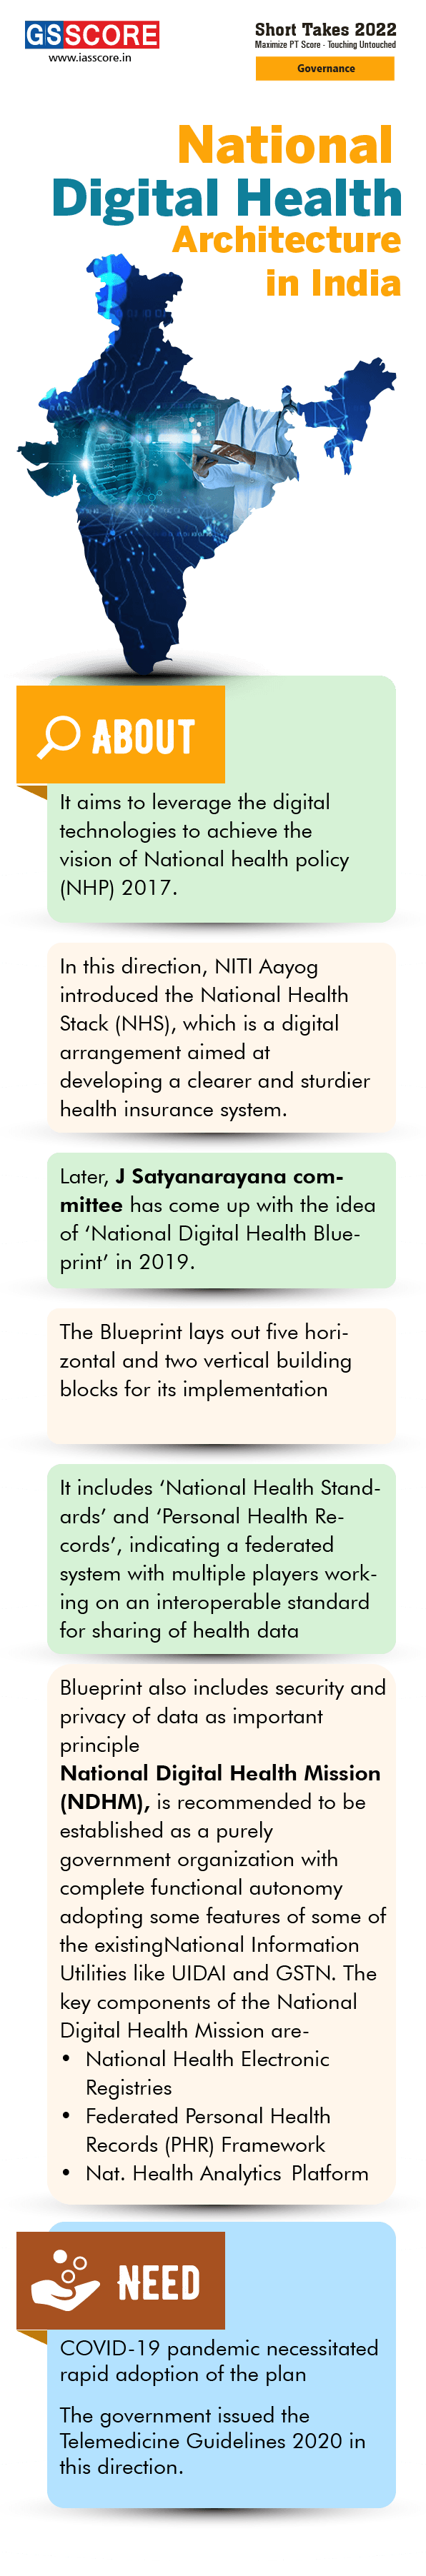 National Digital Health Architecture in India